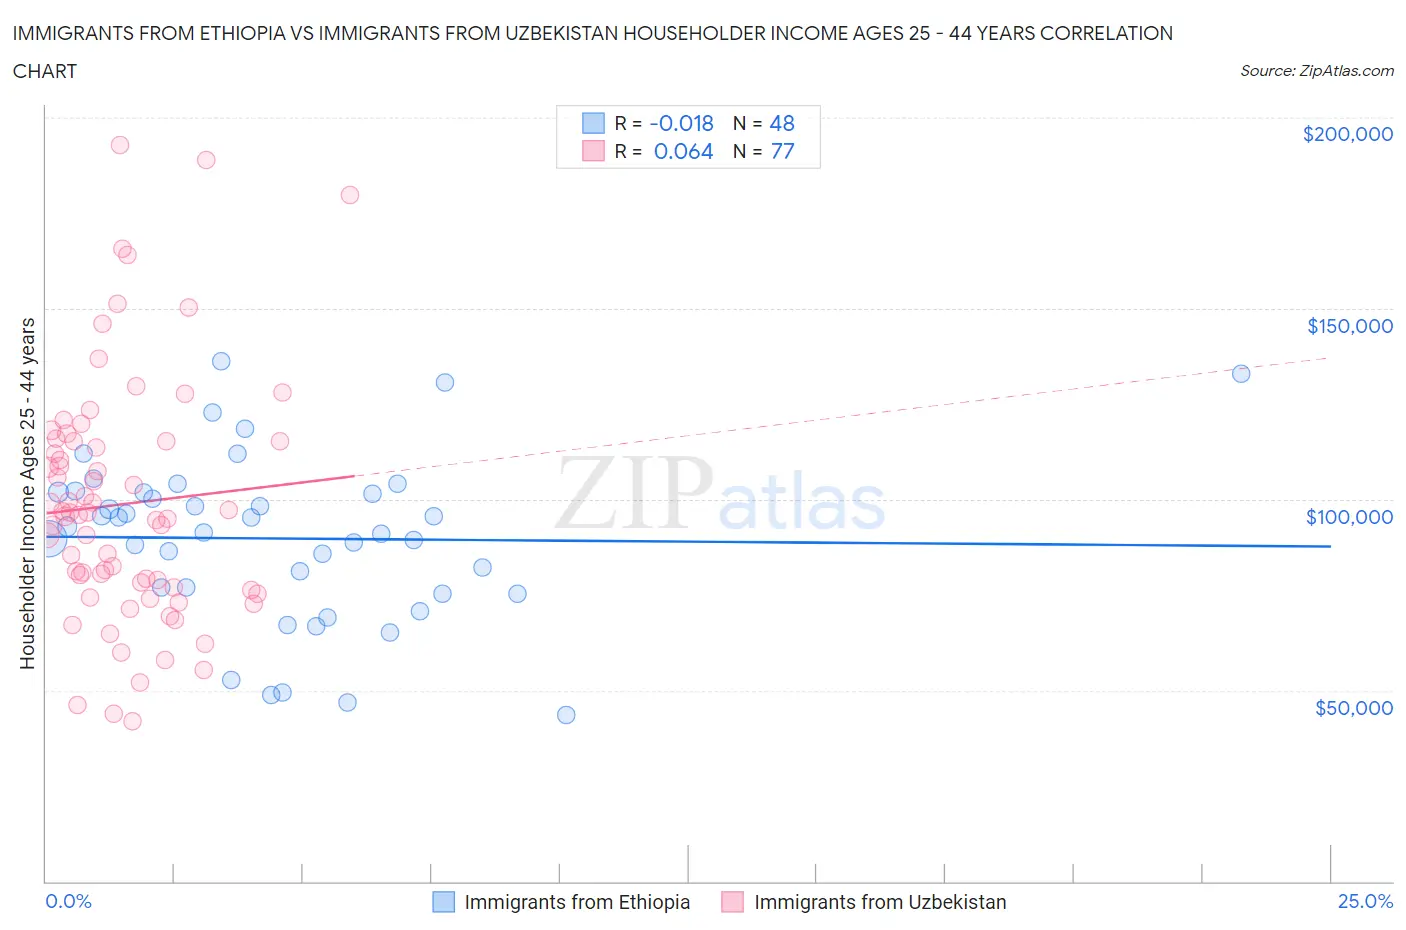 Immigrants from Ethiopia vs Immigrants from Uzbekistan Householder Income Ages 25 - 44 years